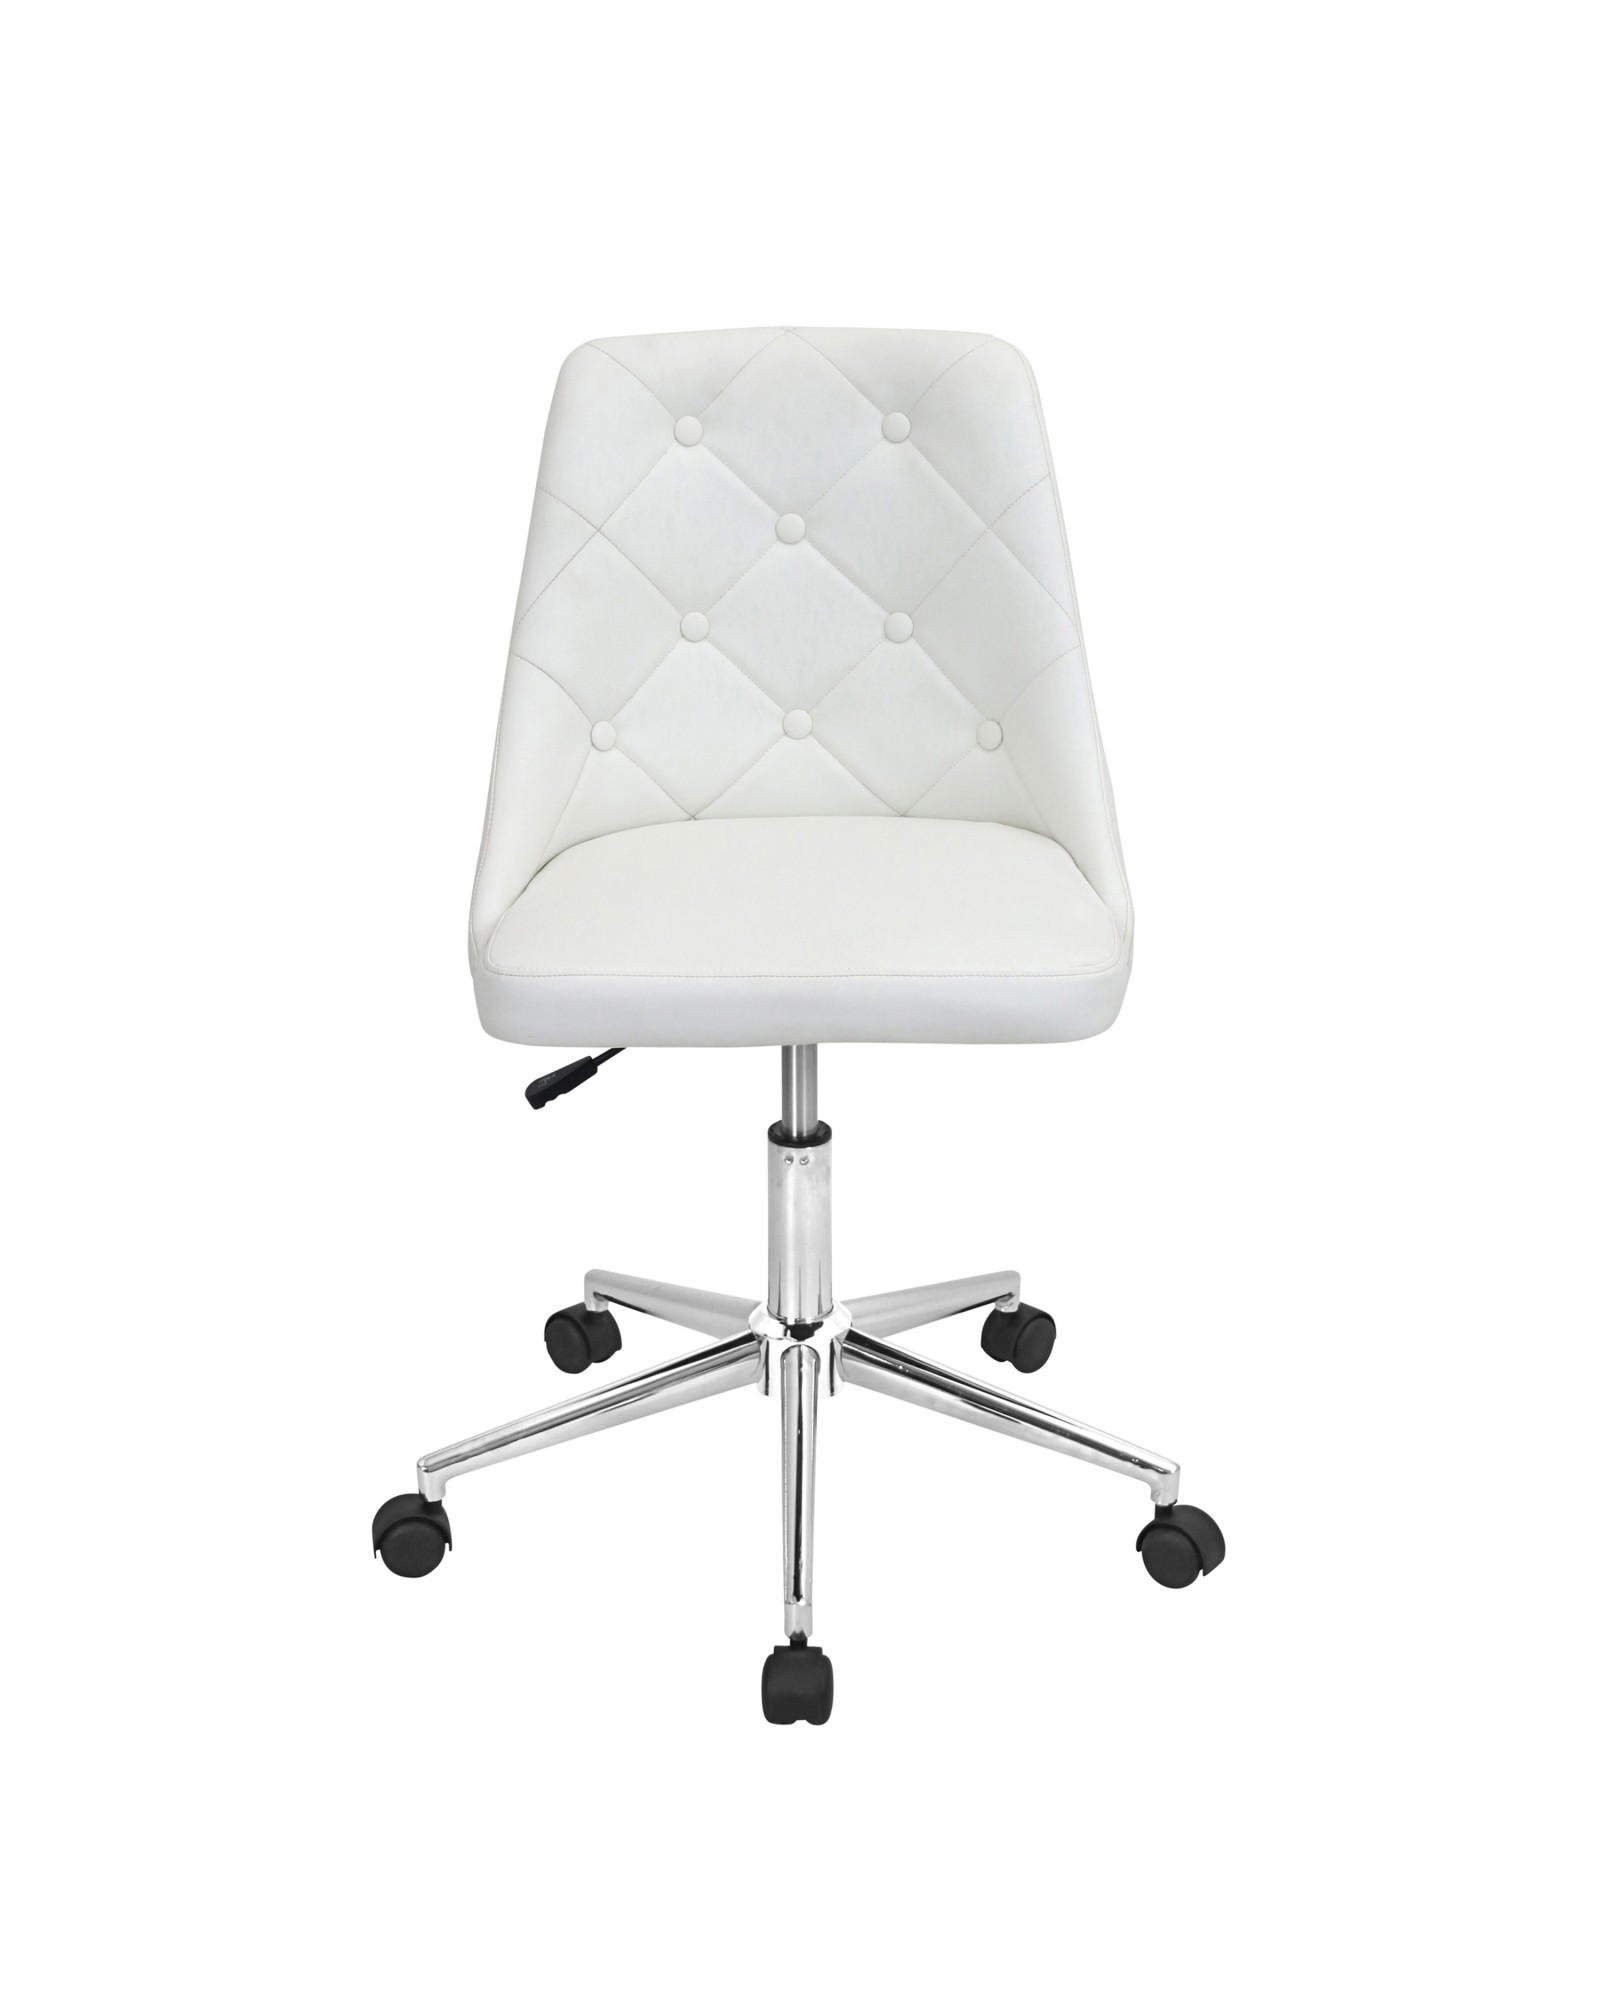 Marche Contemporary Adjustable Office Chair with Swivel in White Faux Leather